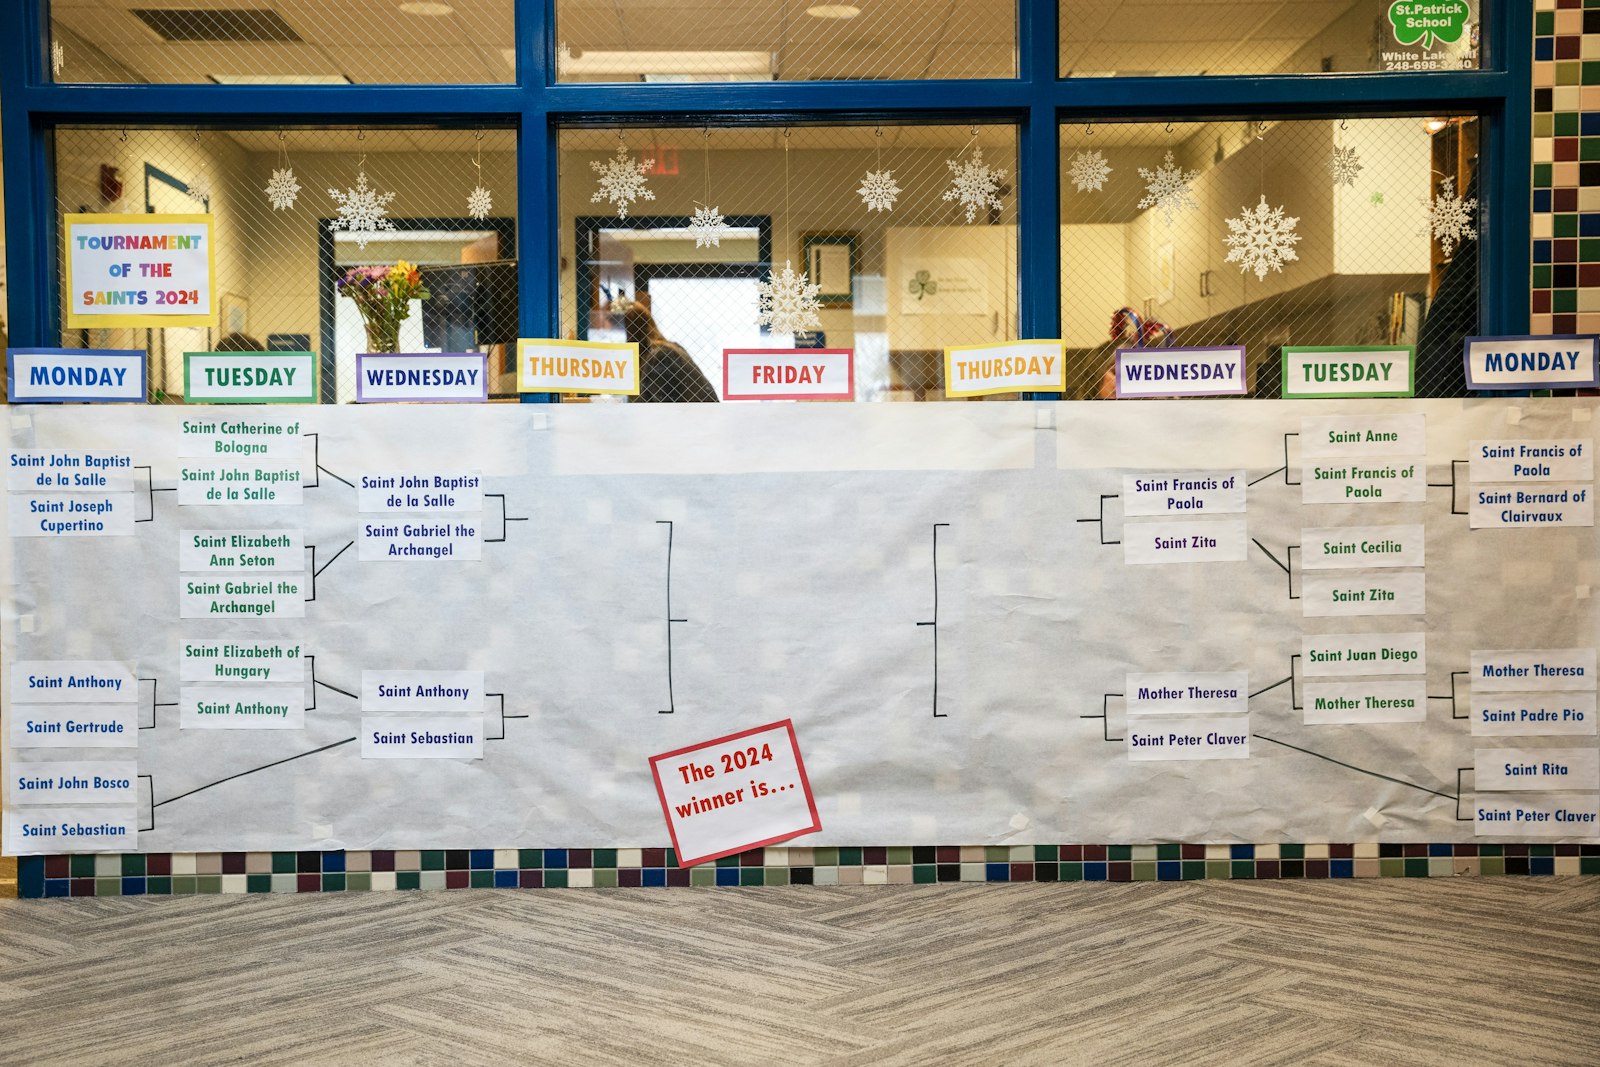 The 2024 bracket is on display at the schoo entrance, and includes a variety of saints.